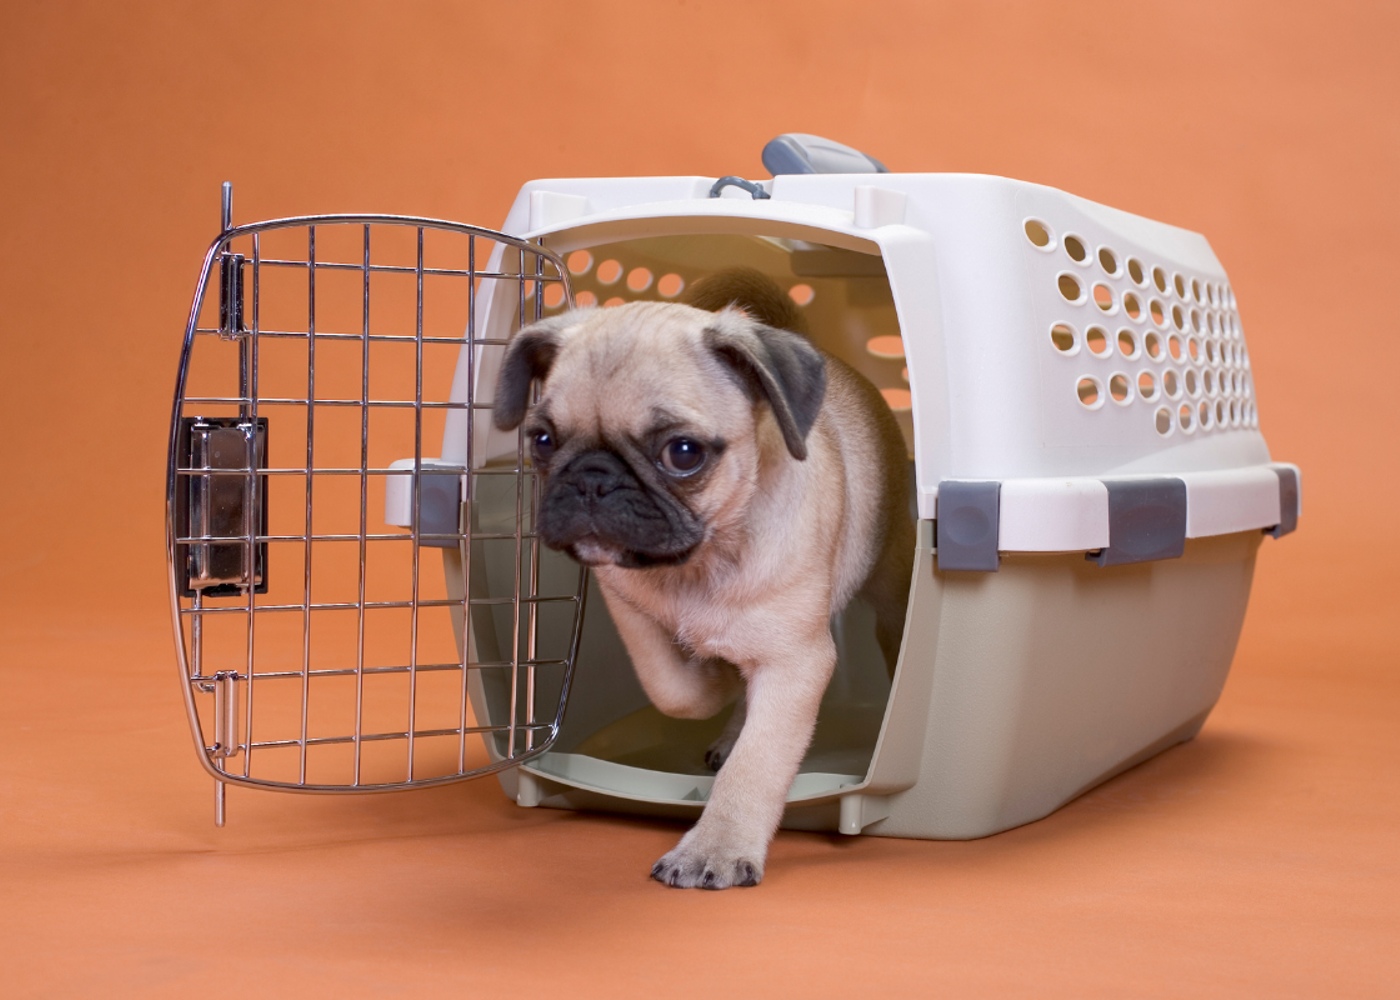 A happy pug exiting its crate after recieving Dog Training Elite of Southwest Florida crate training.